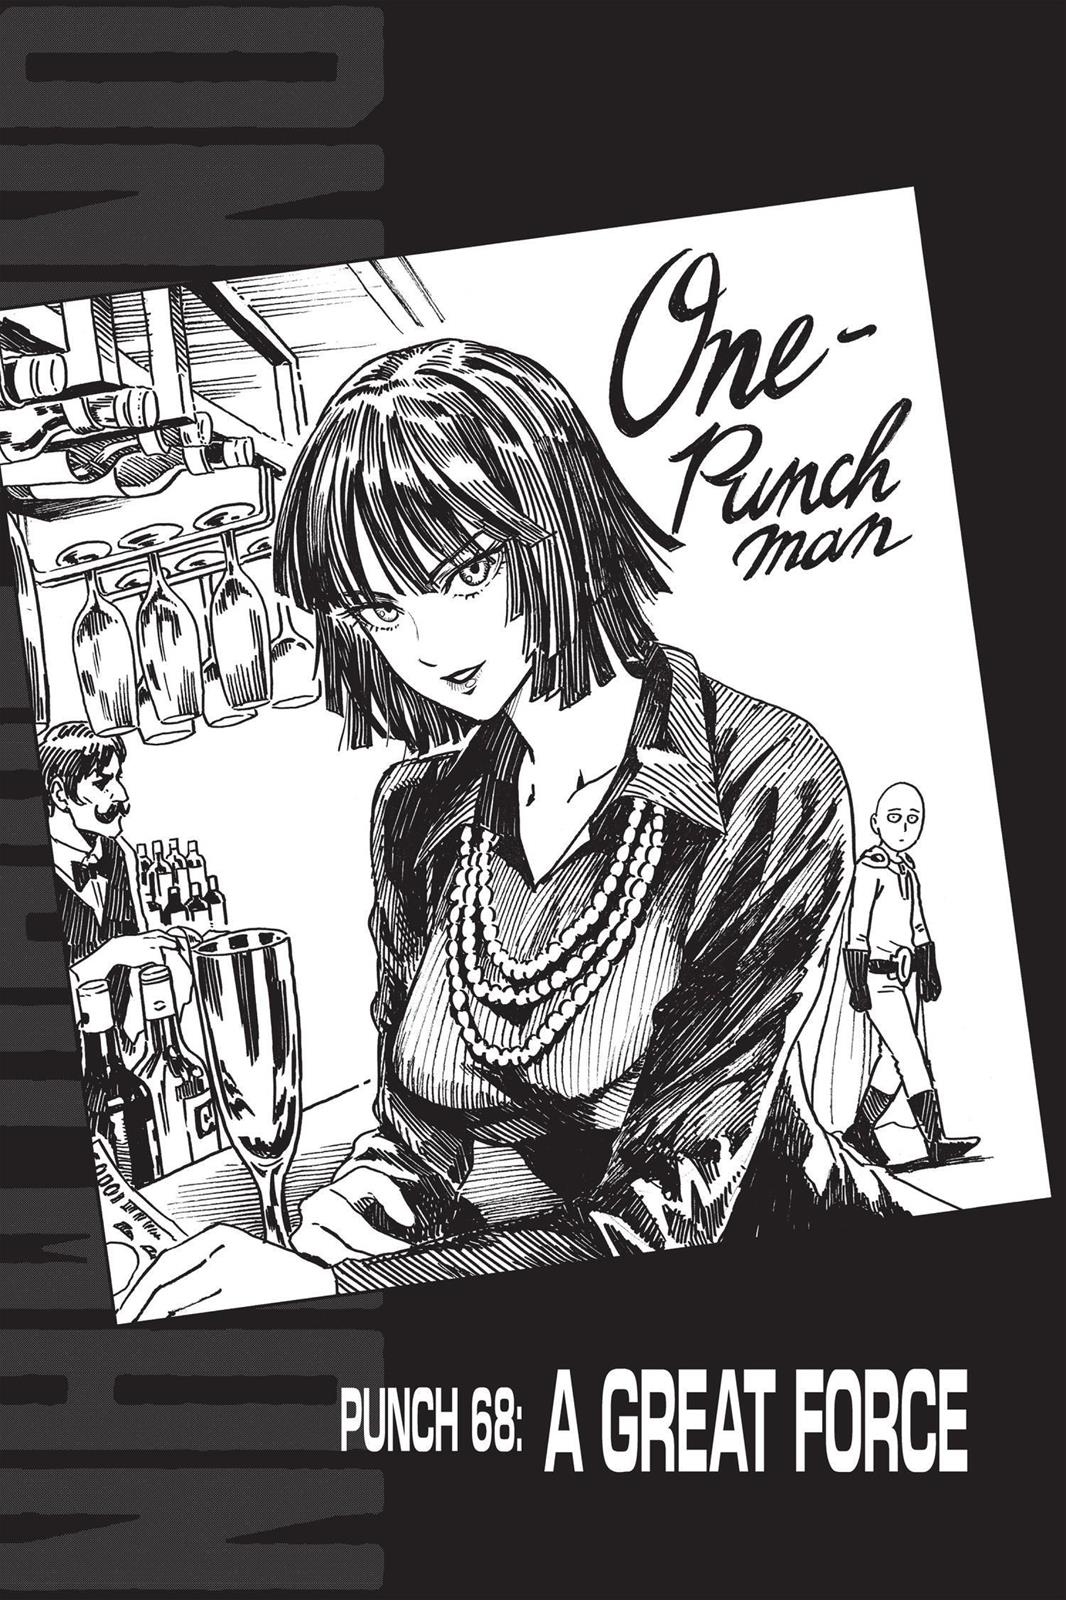 One-Punch Man, Punch 68 image 08